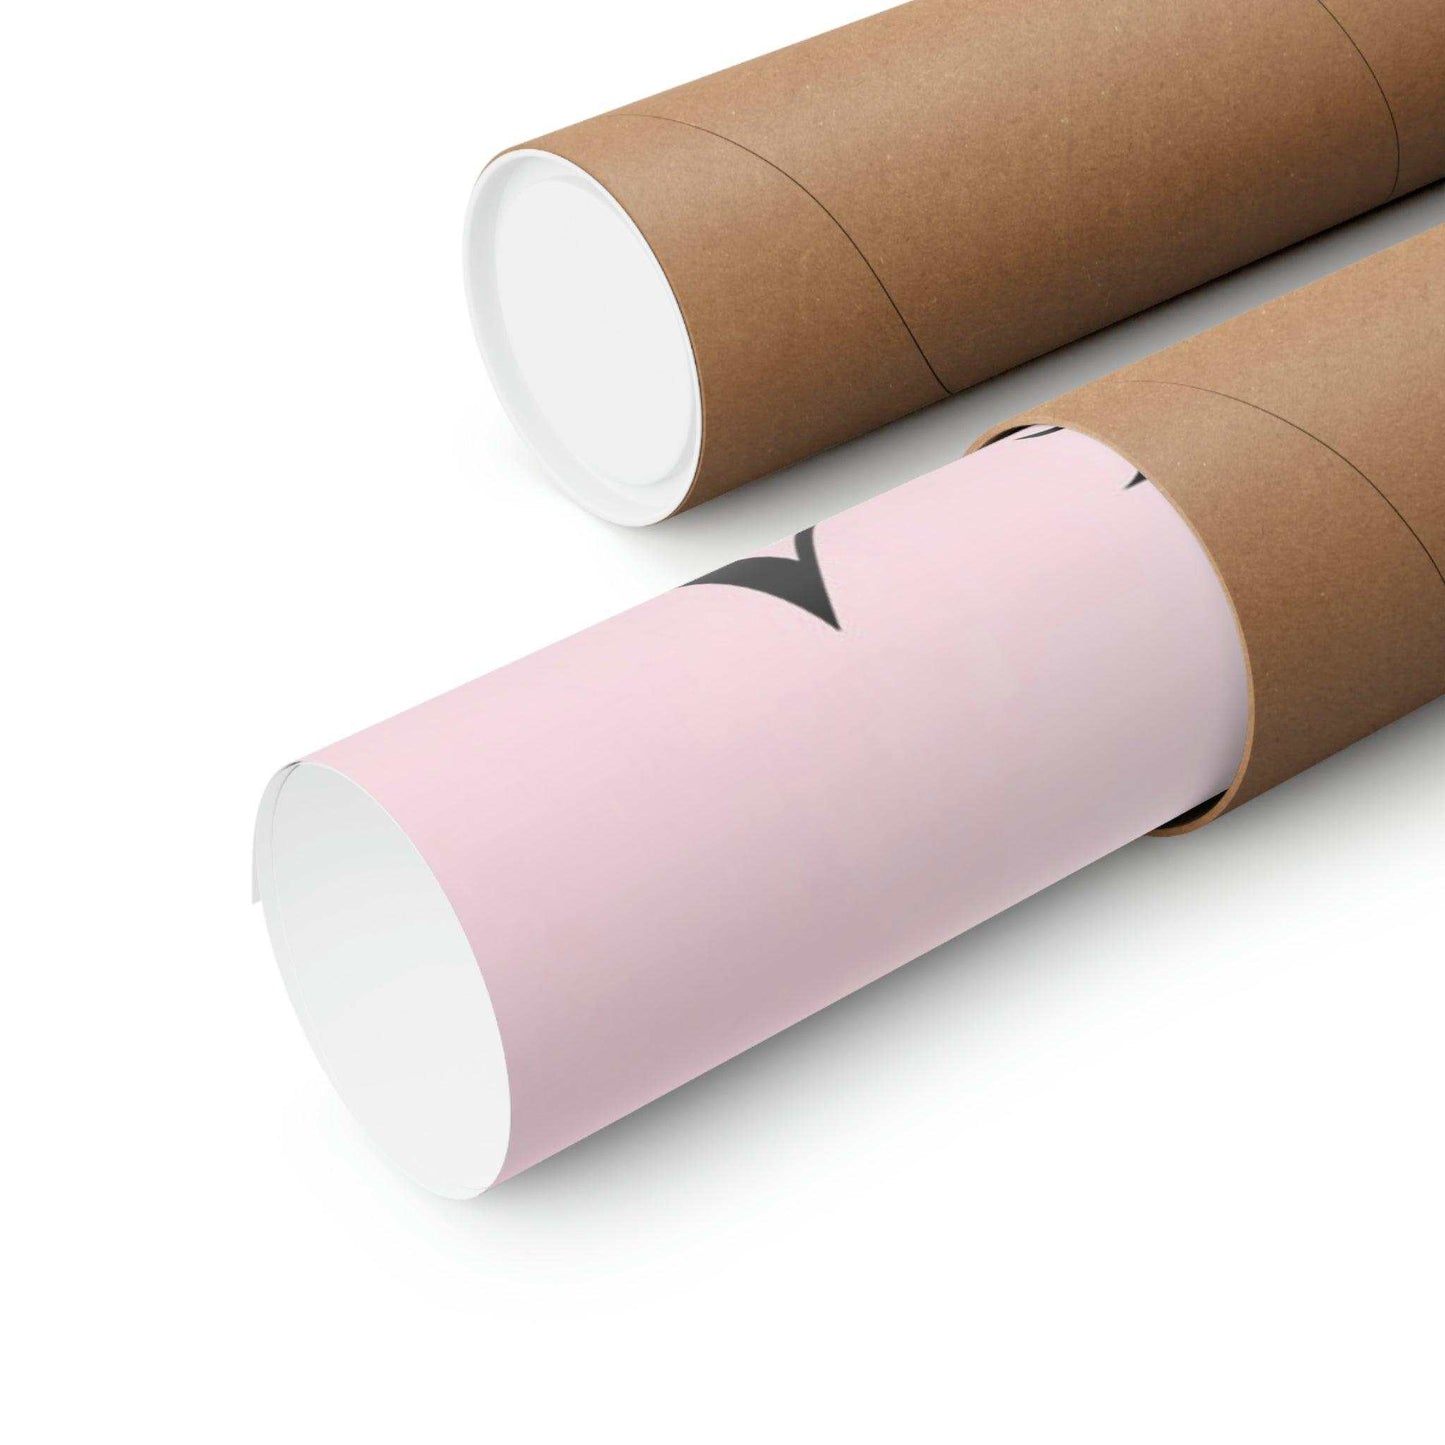 Packaging detail showing two cardboard tubes with the Buddha poster ready for shipment